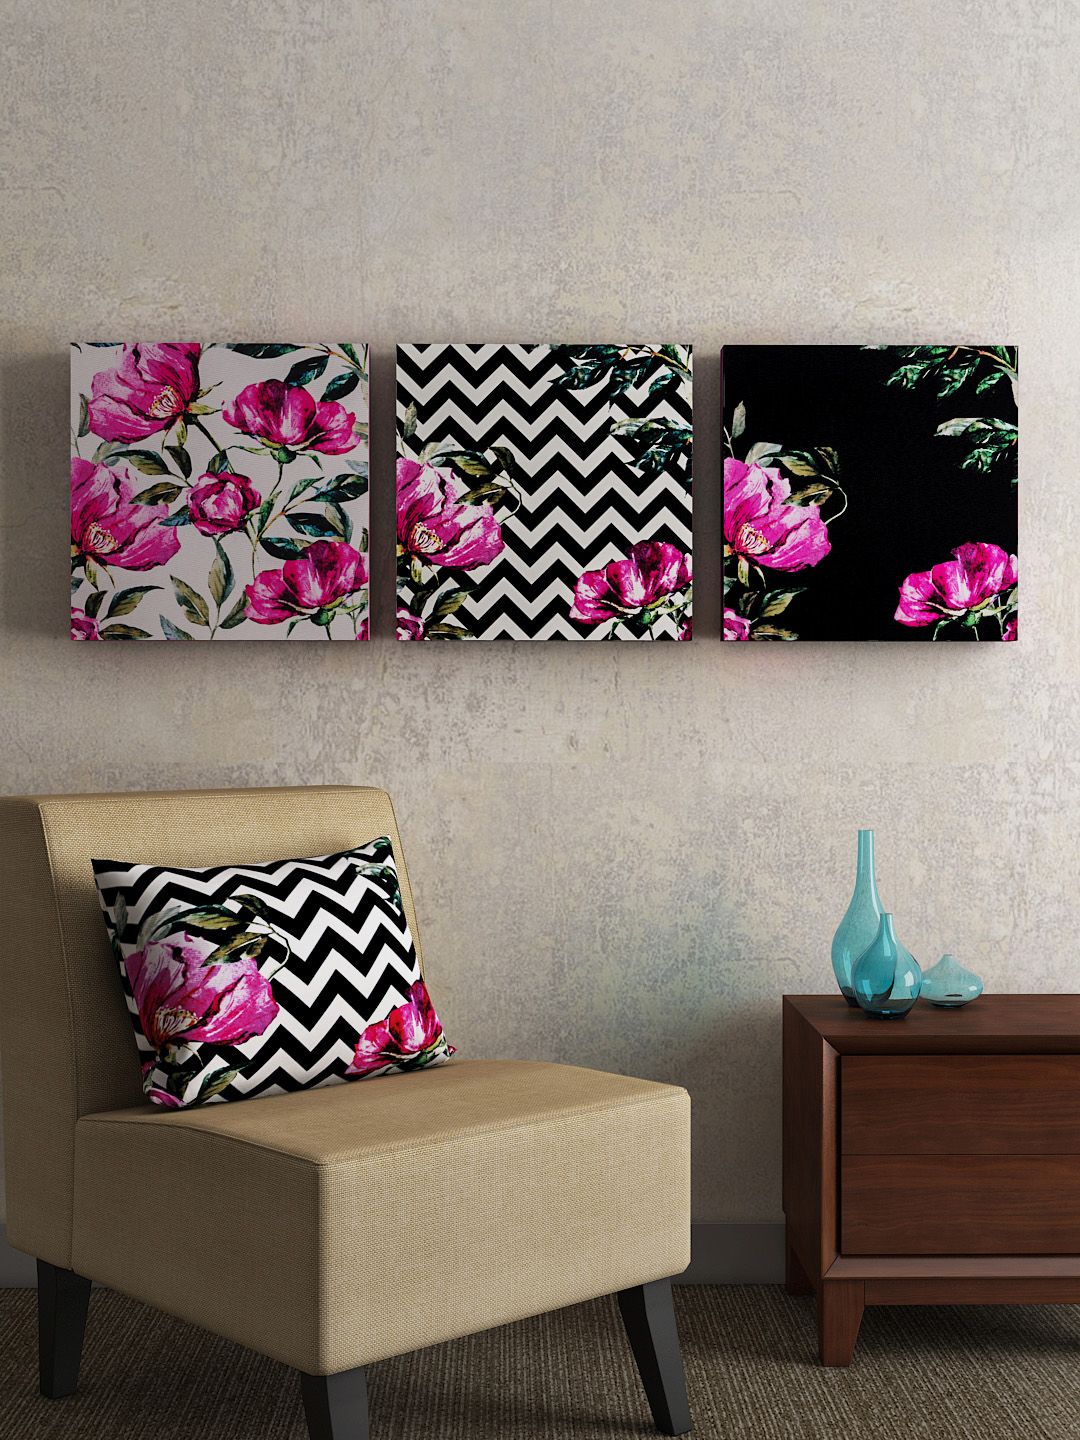 SEJ by Nisha Gupta Set of 3 Multicoloured Framed Wall Paintings Price in India